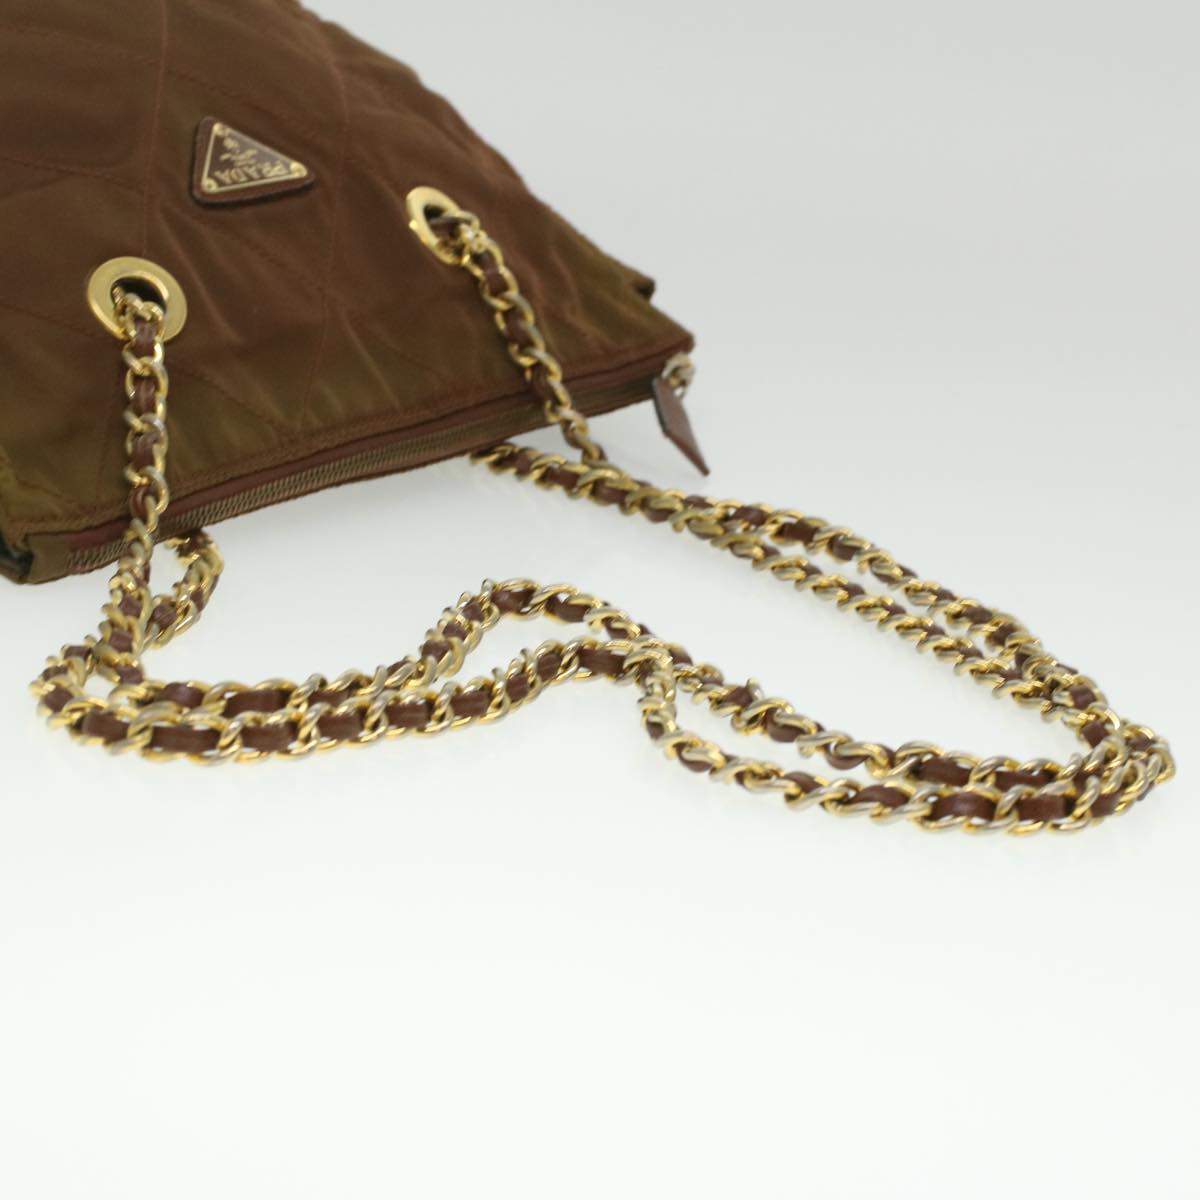 PRADA Quilted Chain Shoulder Bag Nylon Brown Auth 36967